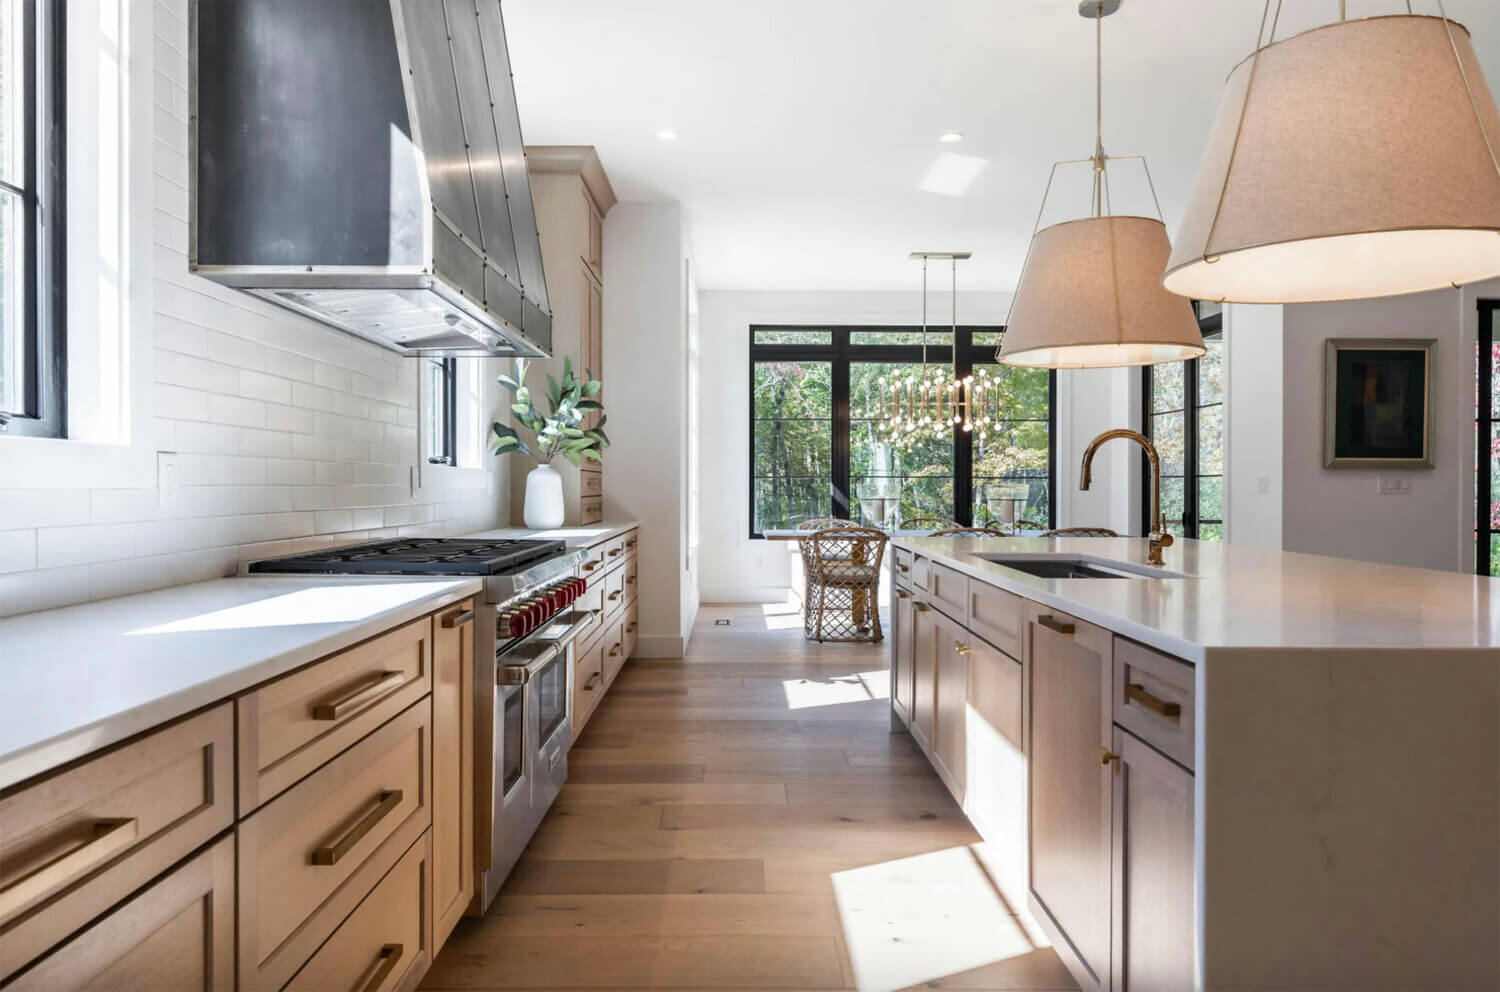 A stunning kitchen with light stained wood cabinets in White Oak with modern brassy accents and farmhouse styled pendant lights over the kitchen island.